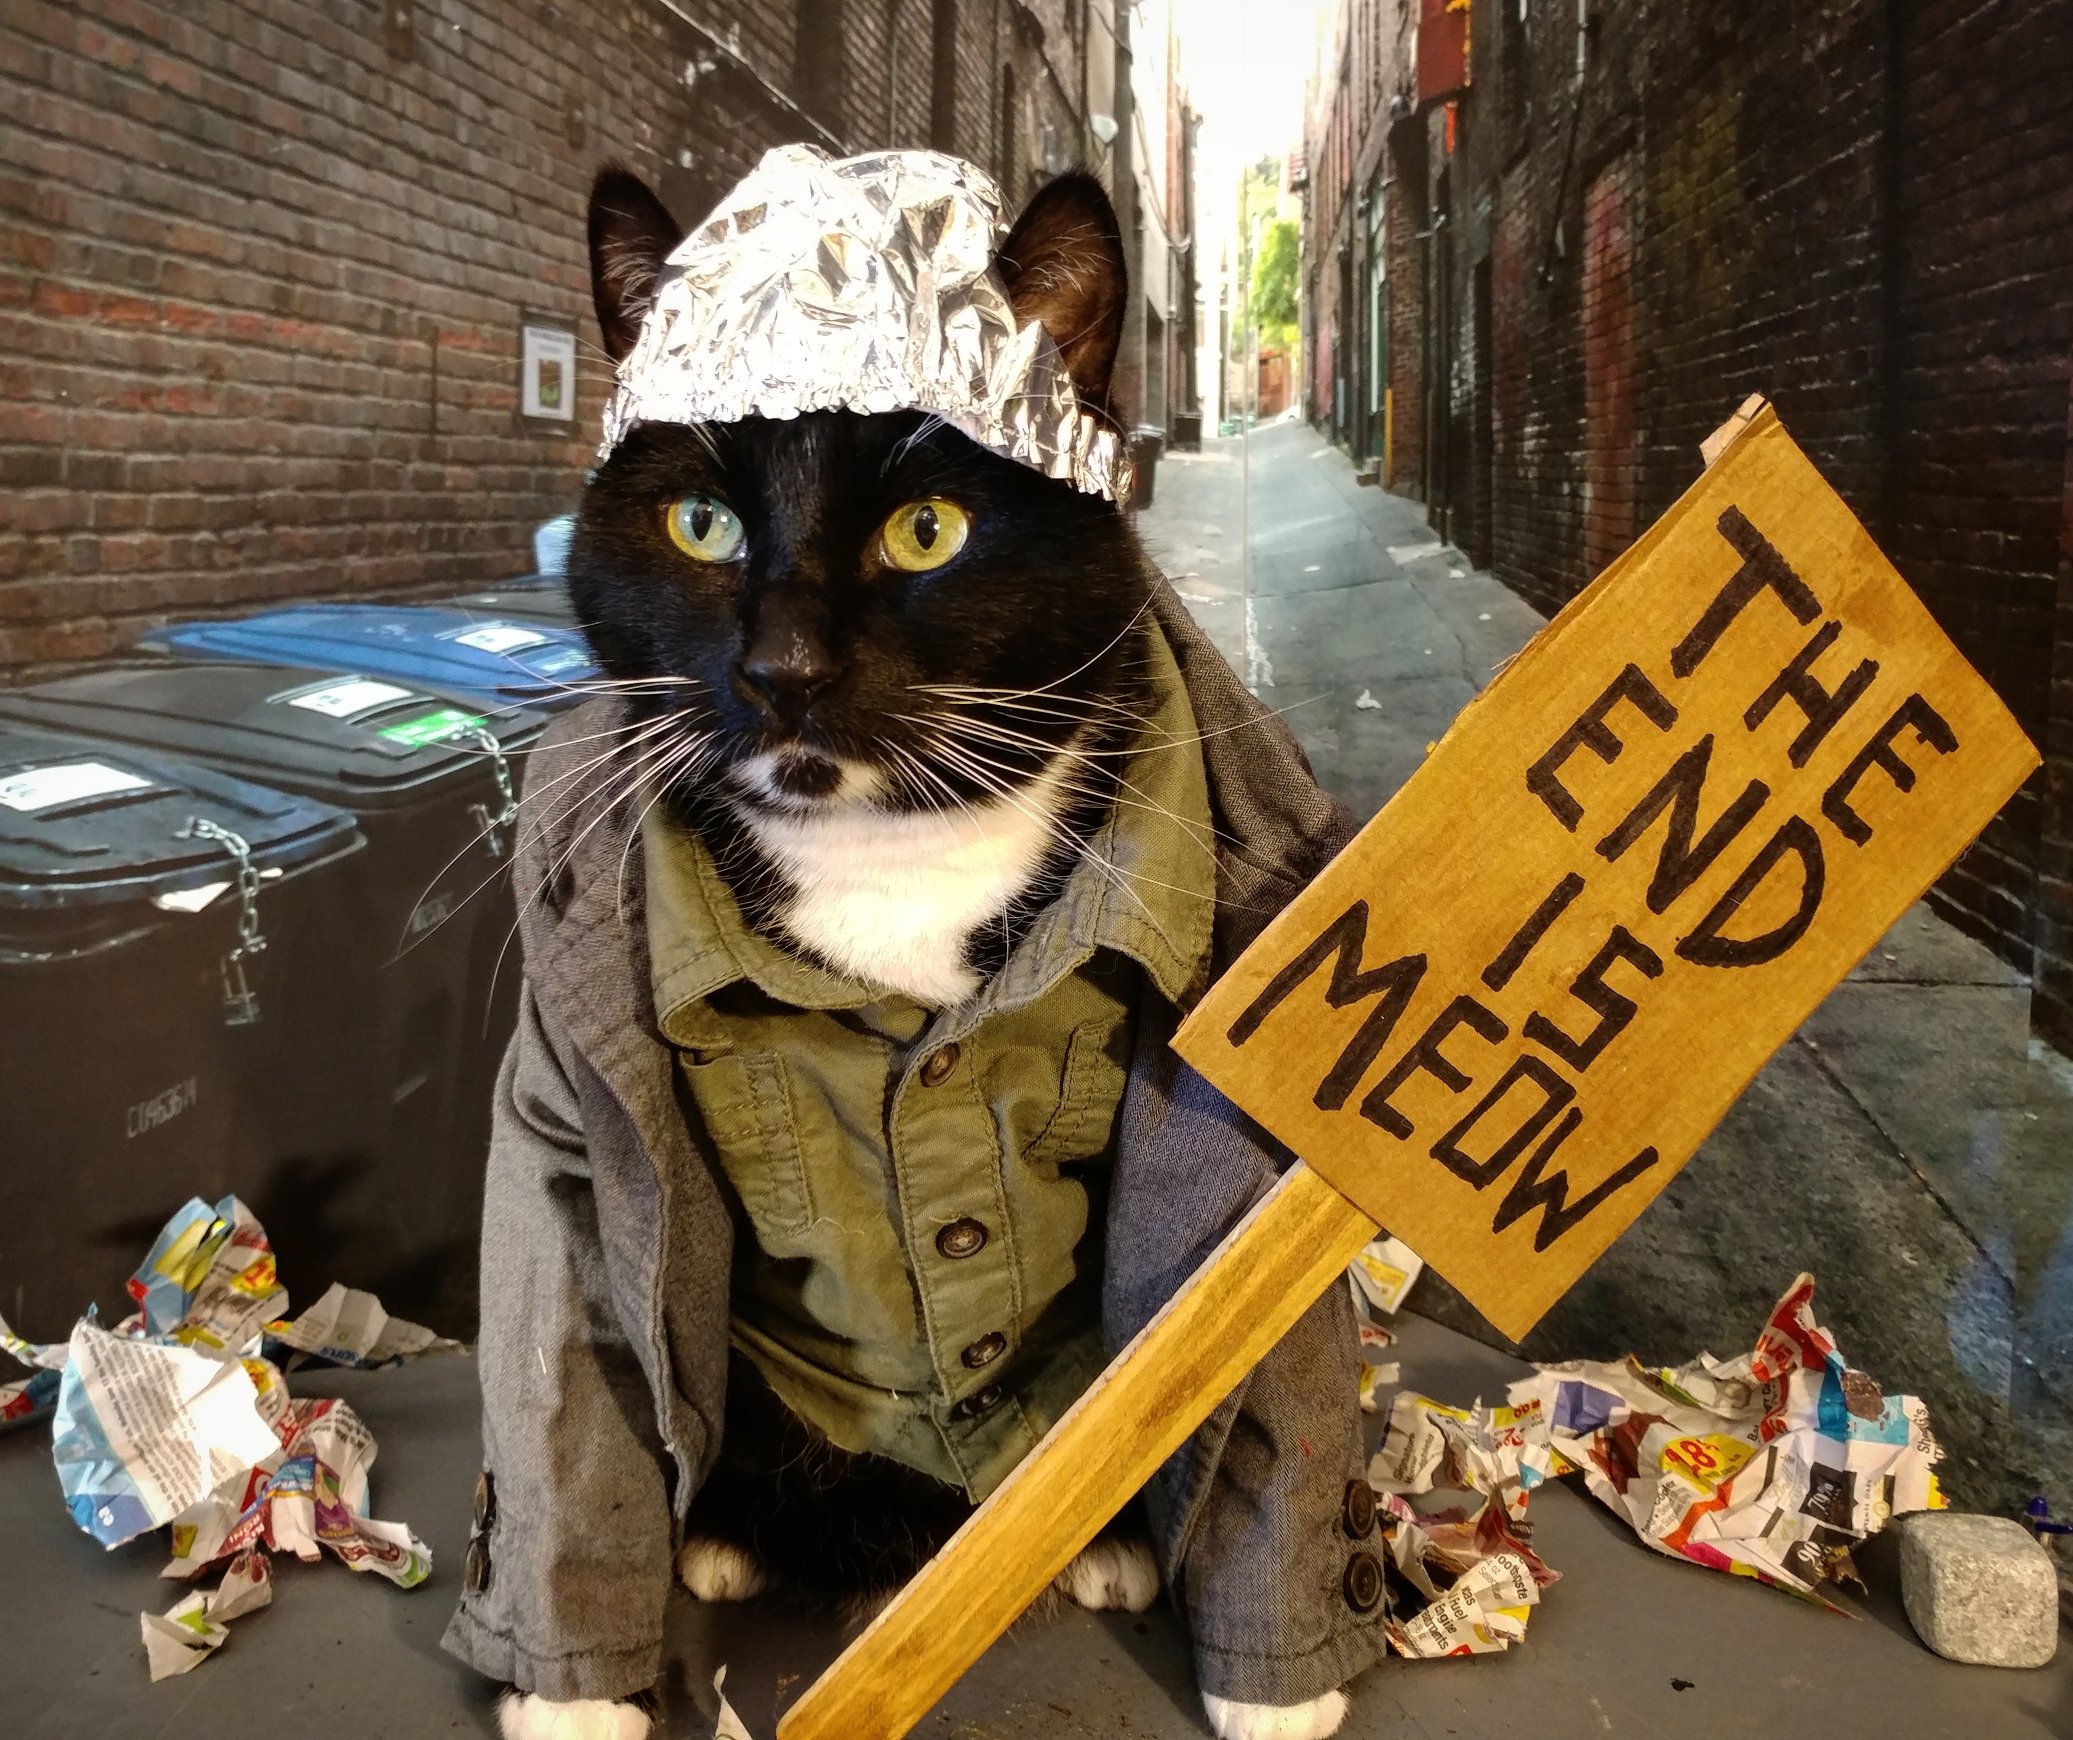 Cat Cosplay on Twitter: "Also a day late wishing @ArchieMcPhee a happy 35th  anniversary! Here's to many more years of zany cat accessories! (Tin Foil  Hat for Cats pictured) https://t.co/MMr1pKZyWb" / X